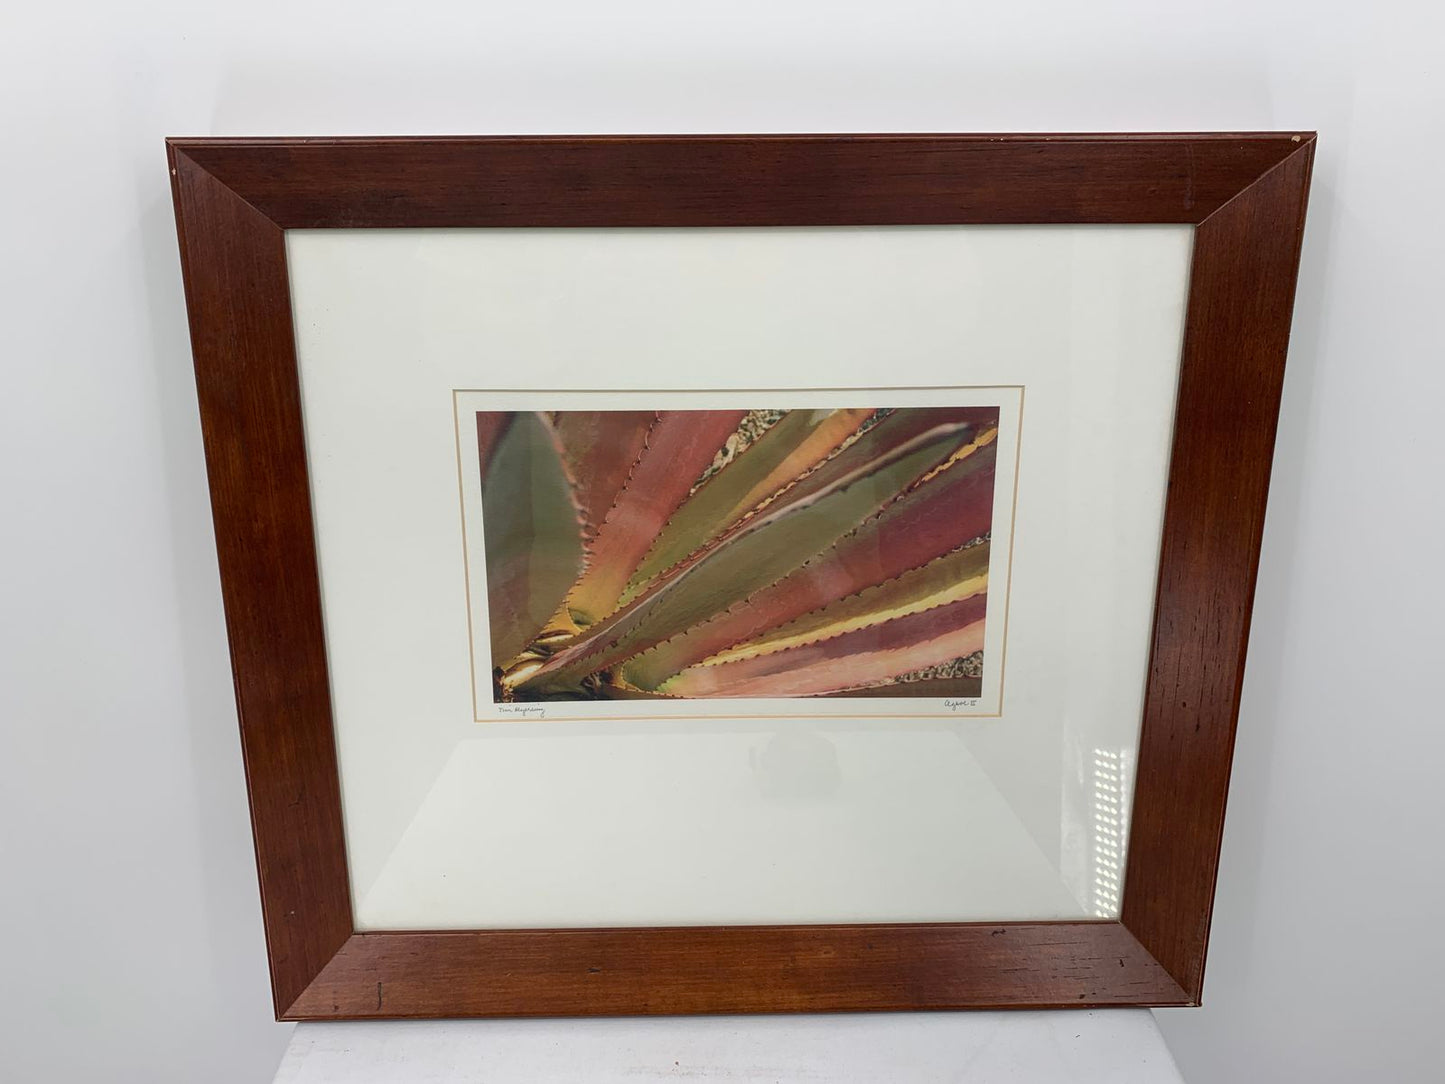 Tim Myerring Framed And Matted Artwork Photography "Agave II" Signed